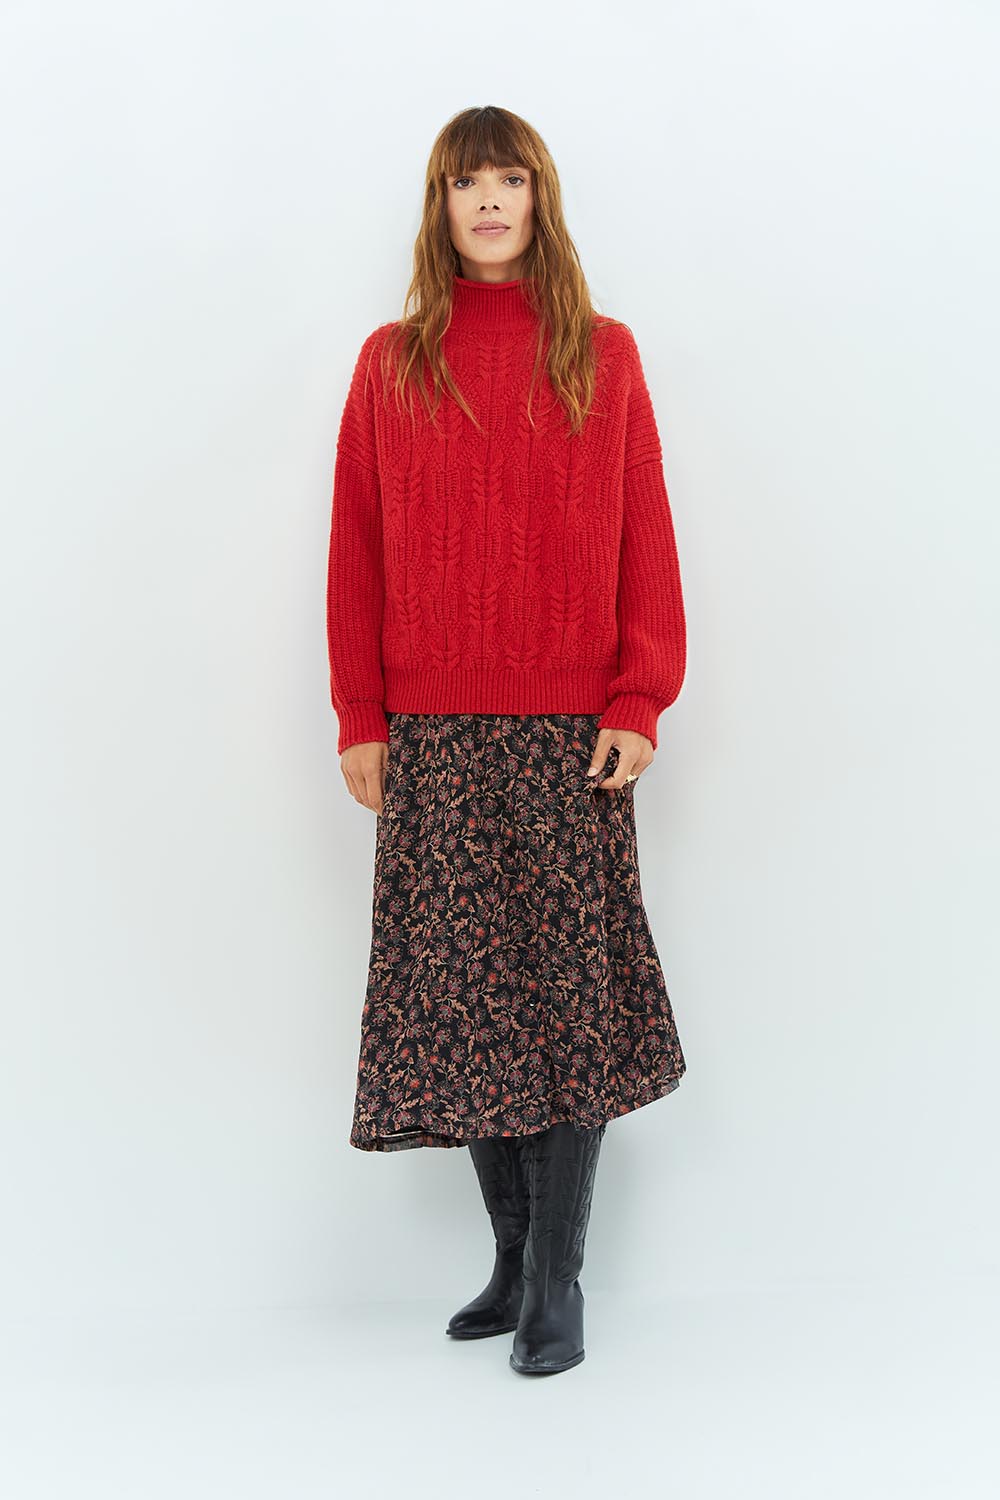 TENERIFE - Pull rouge en tricot fantaisie – One Step